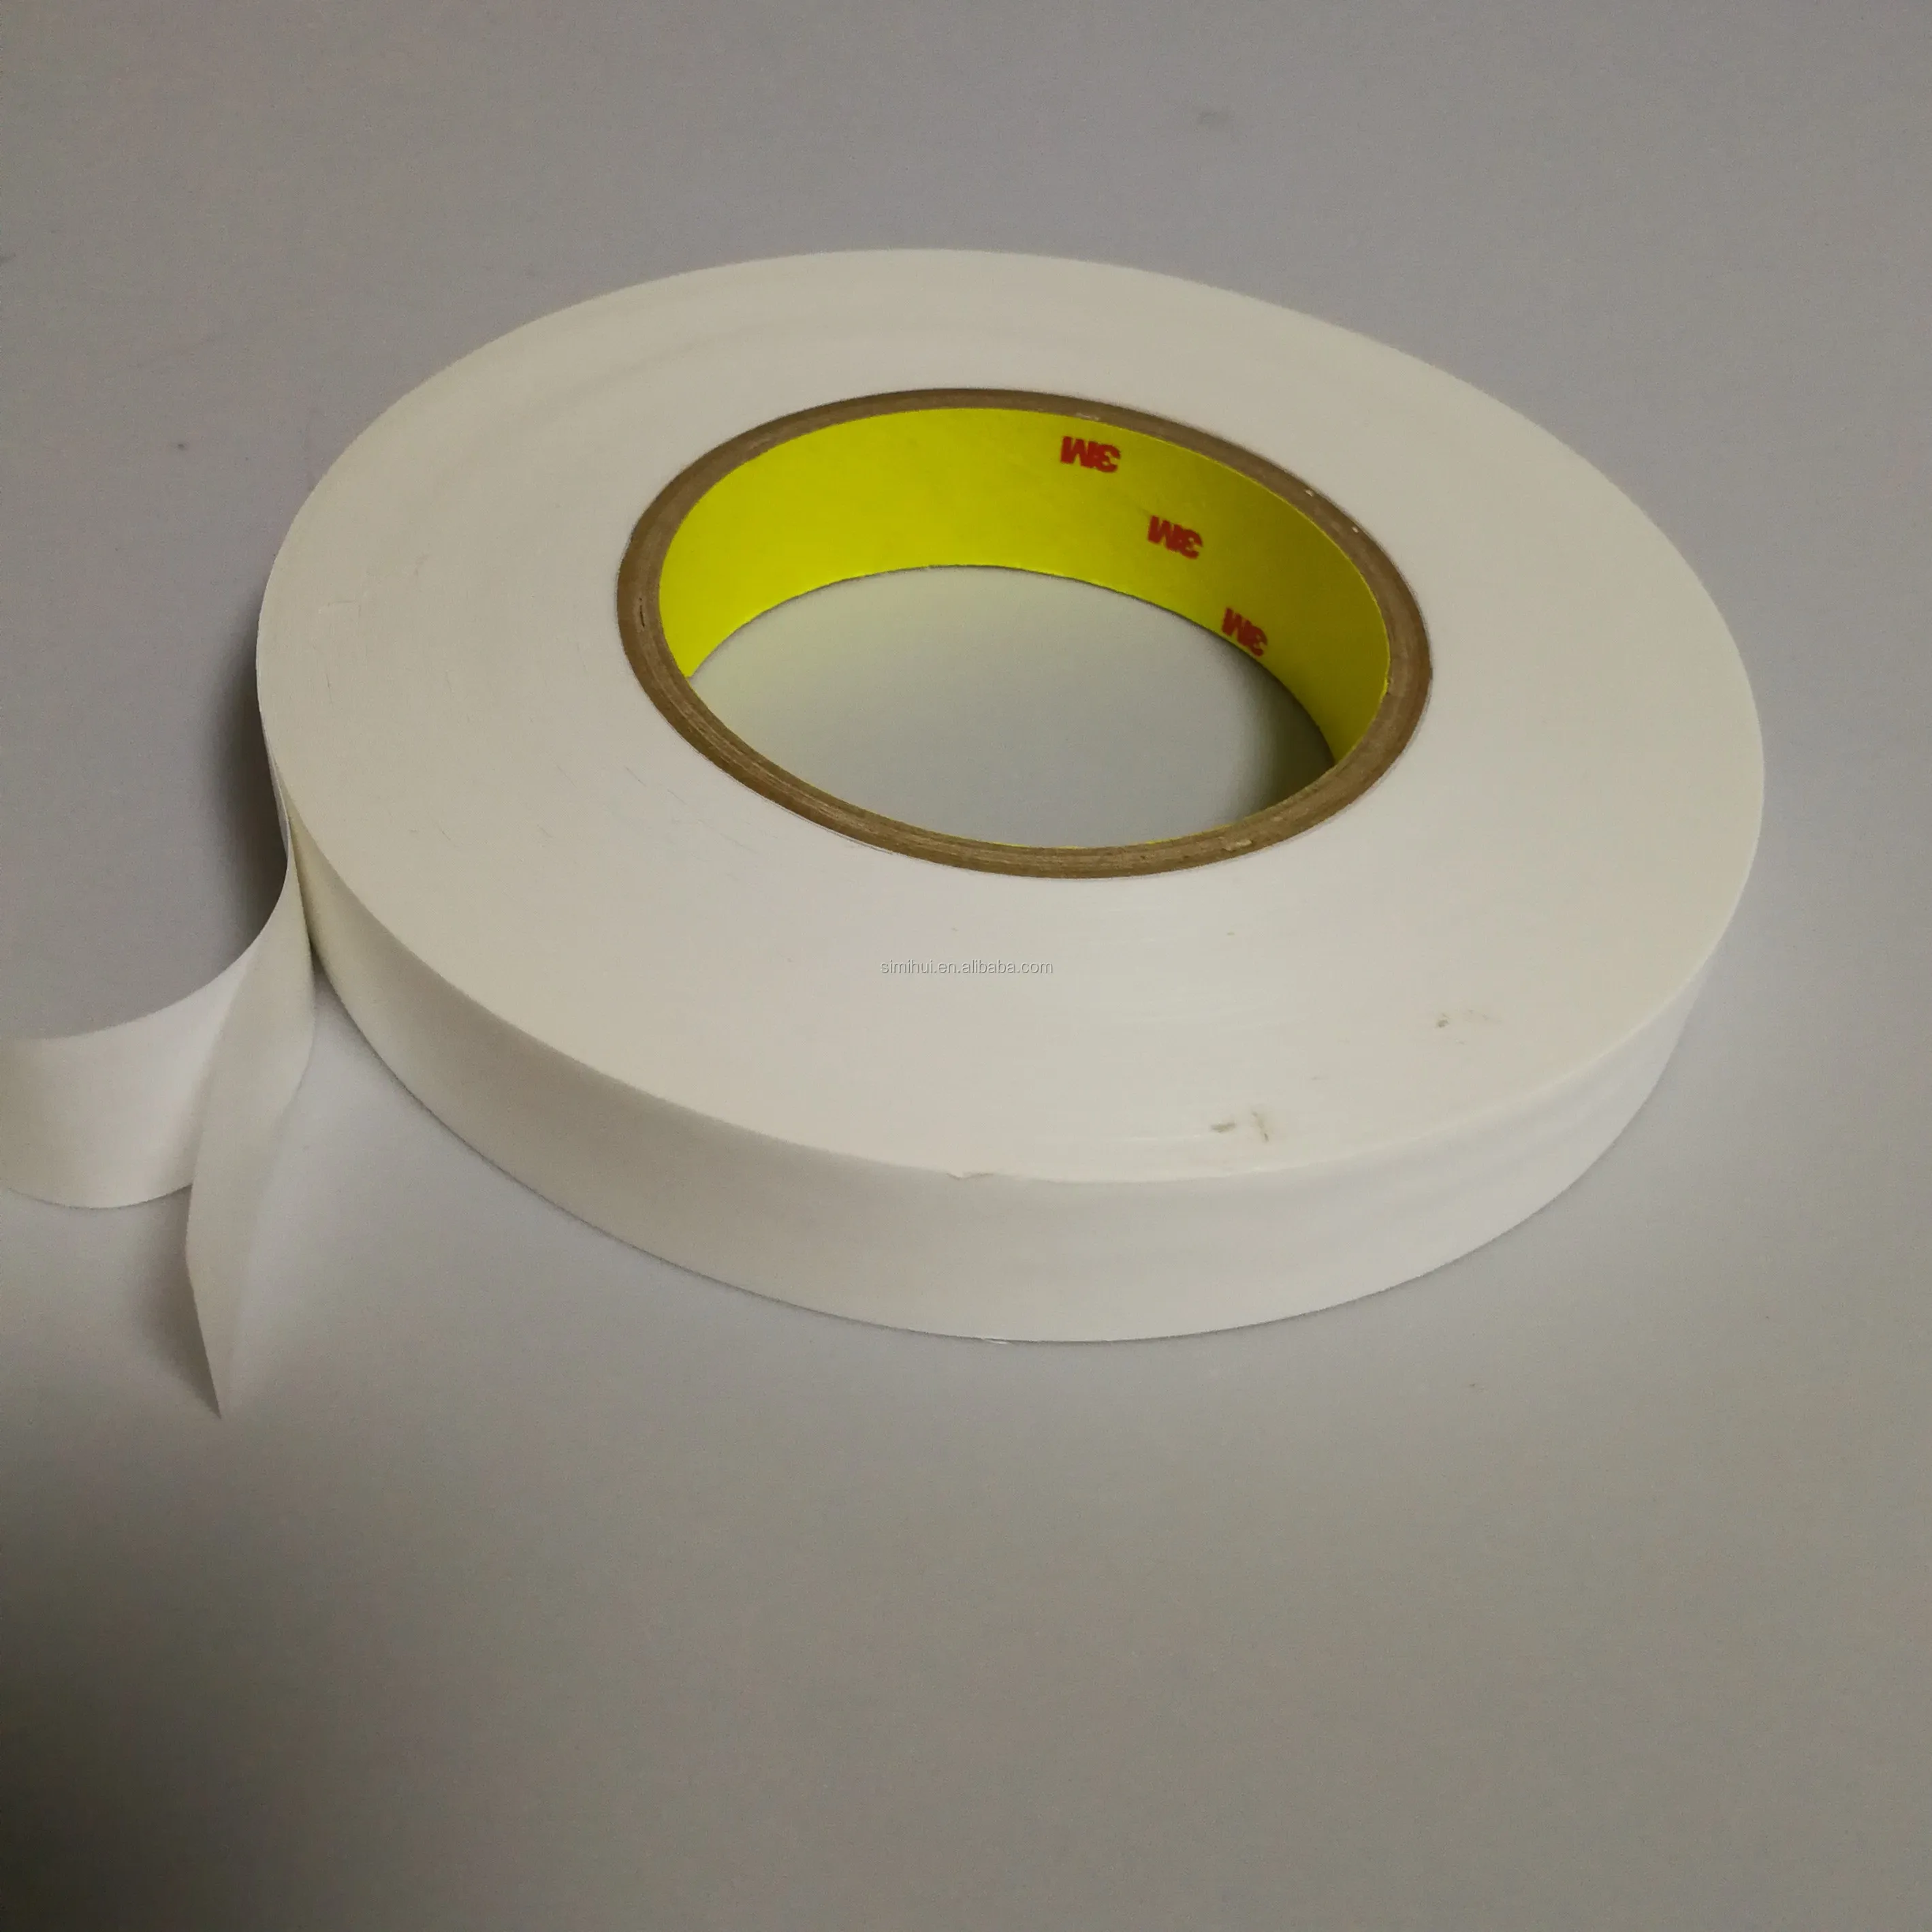 Repositionable Tape - 3m Double Sided Removable Tape 9415pc 0.05mm